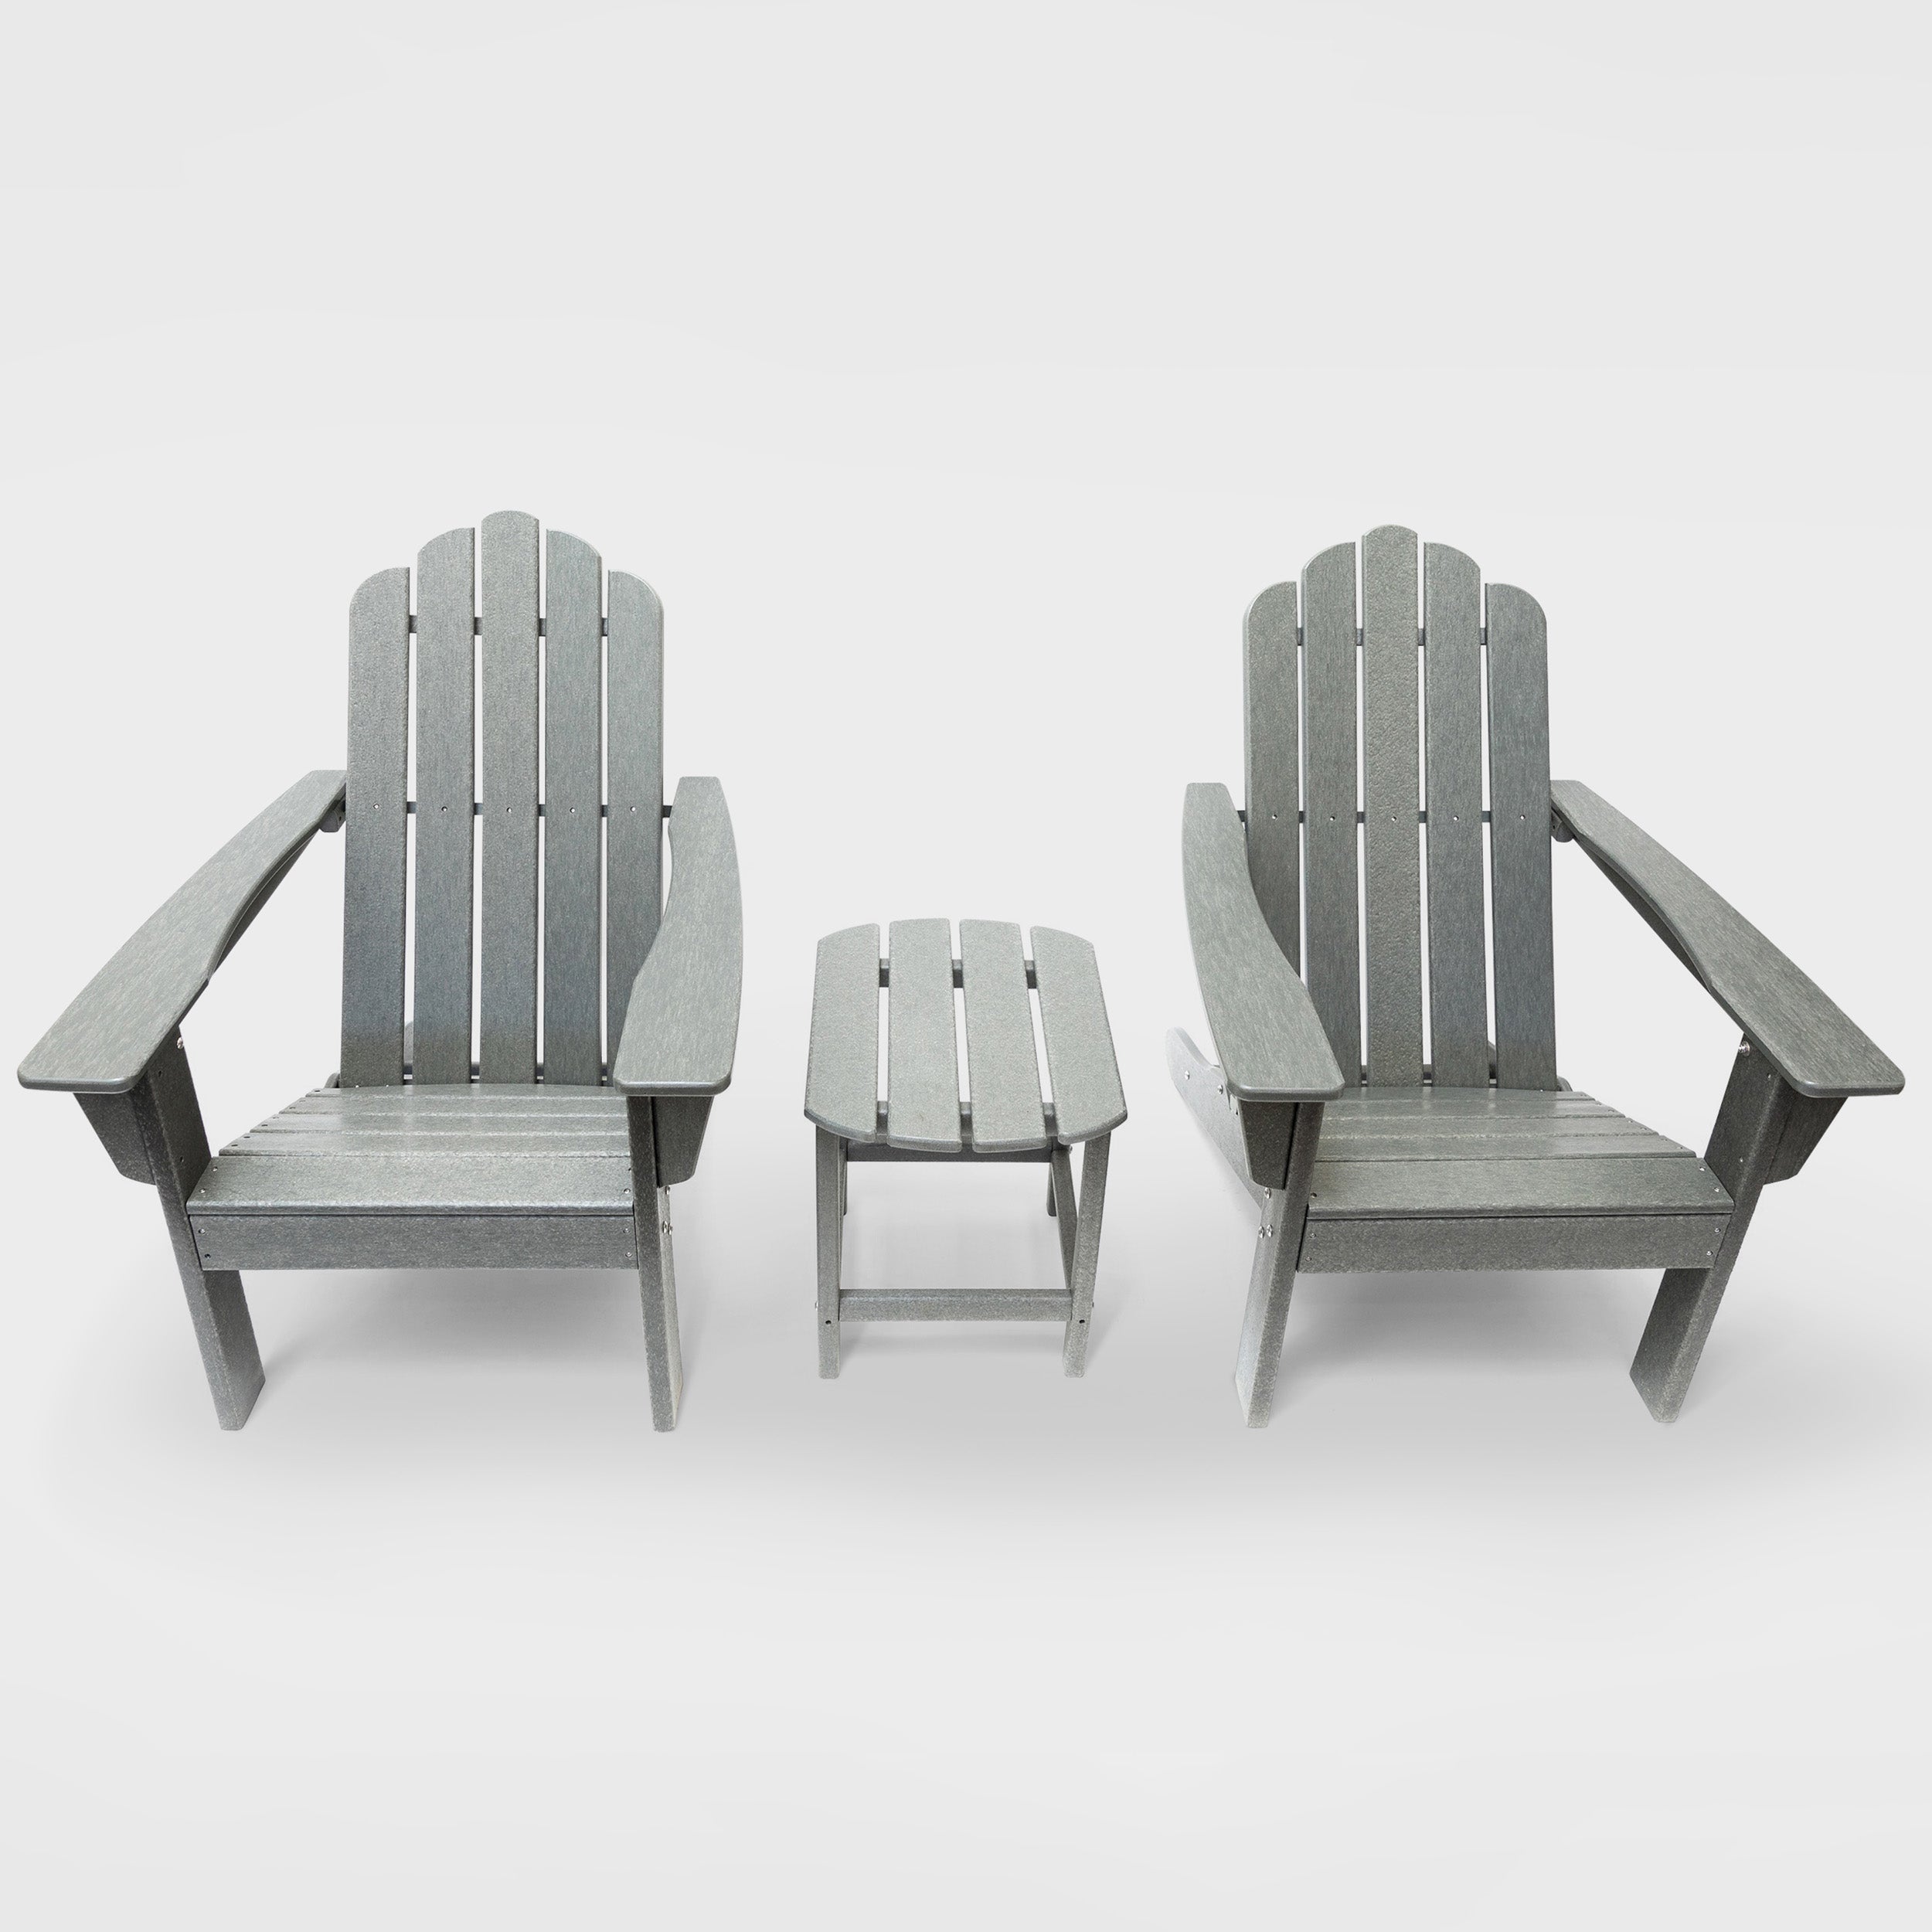 LuXeo Marina HDPE Recycled Plastic Outdoor Patio Adirondack Chair and Table Set (3-Piece)